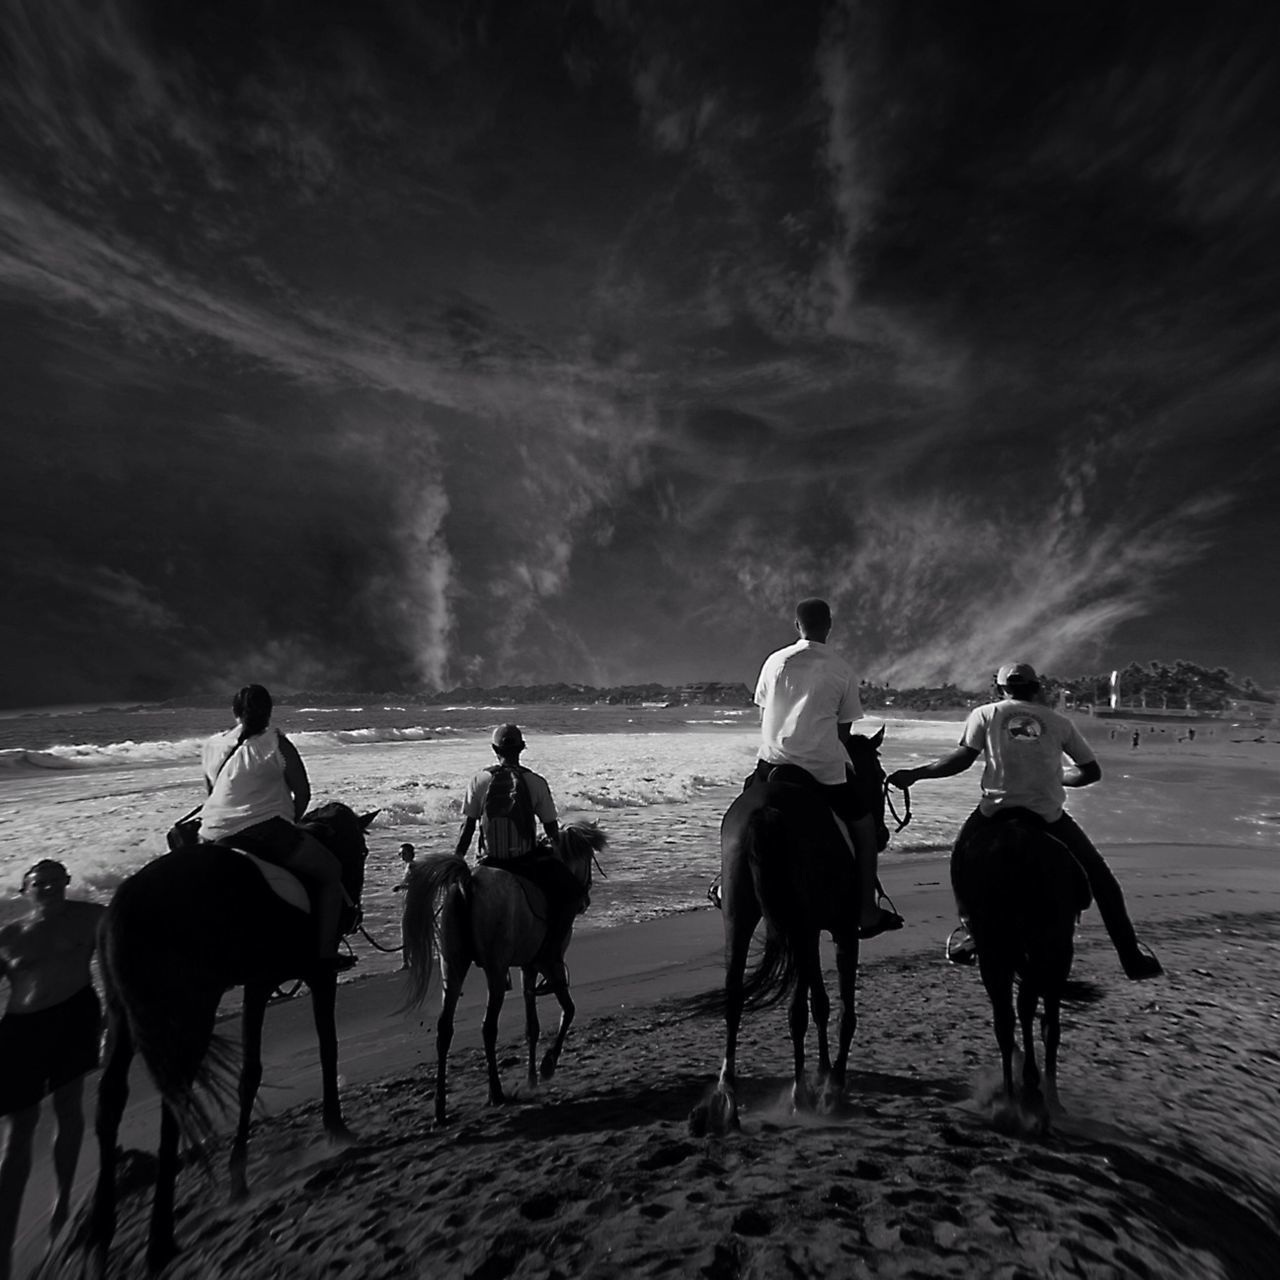 men, lifestyles, leisure activity, beach, sky, person, sand, large group of people, horse, animal themes, domestic animals, working animal, walking, riding, rear view, togetherness, full length, transportation, mixed age range